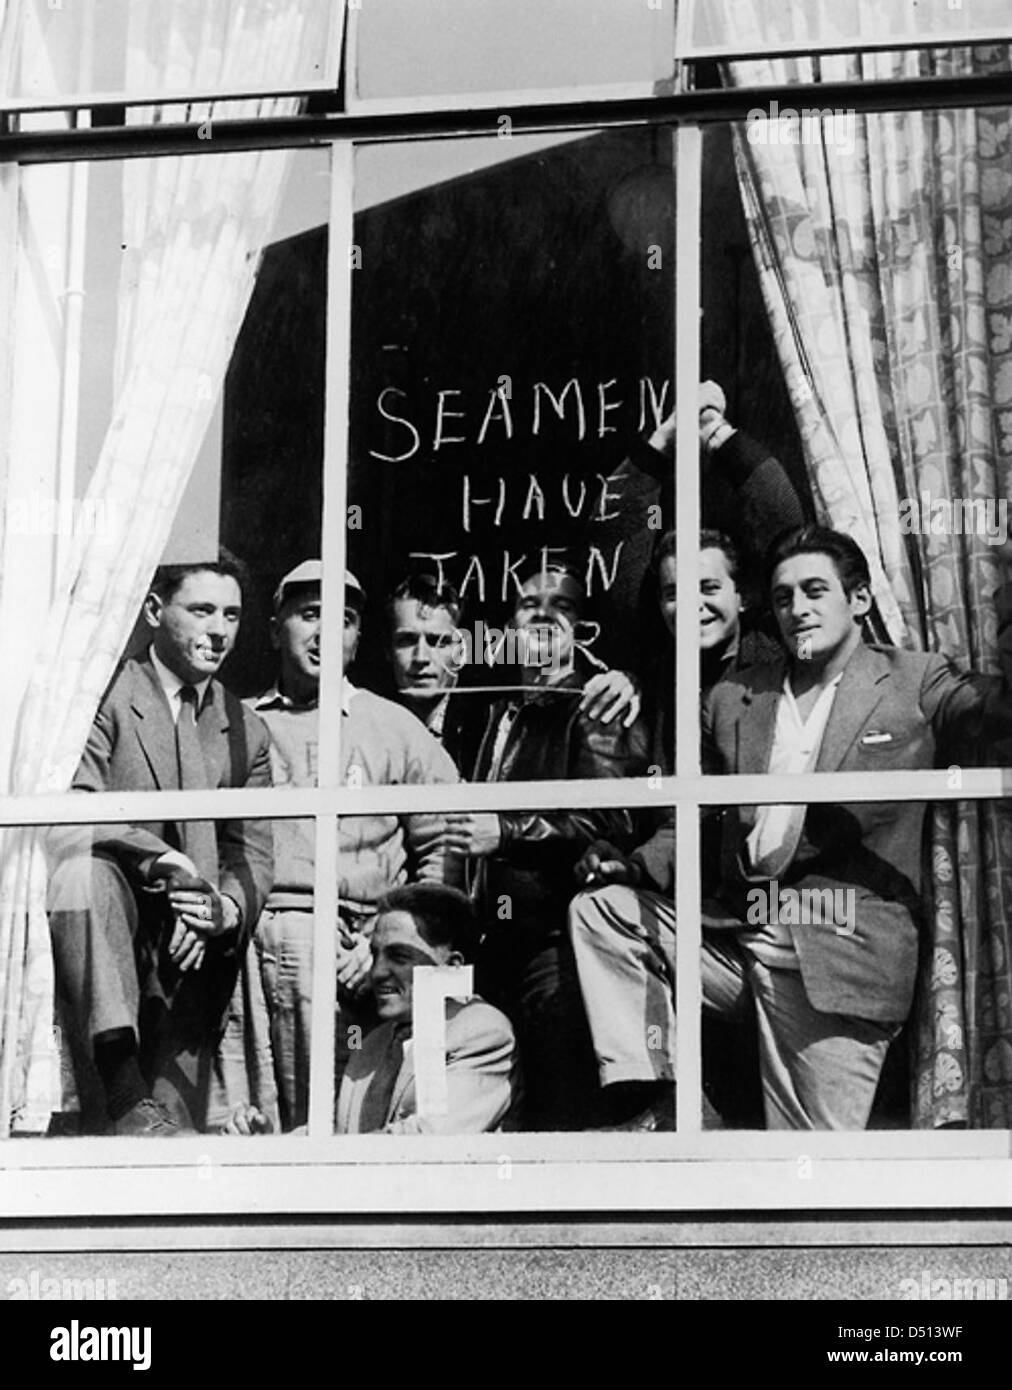 Striking Seamen, loyal to the National Seaman's Reform Movement, barricaded into the National Union of Seamen Office in East India Dock Road, Poplar Stock Photo